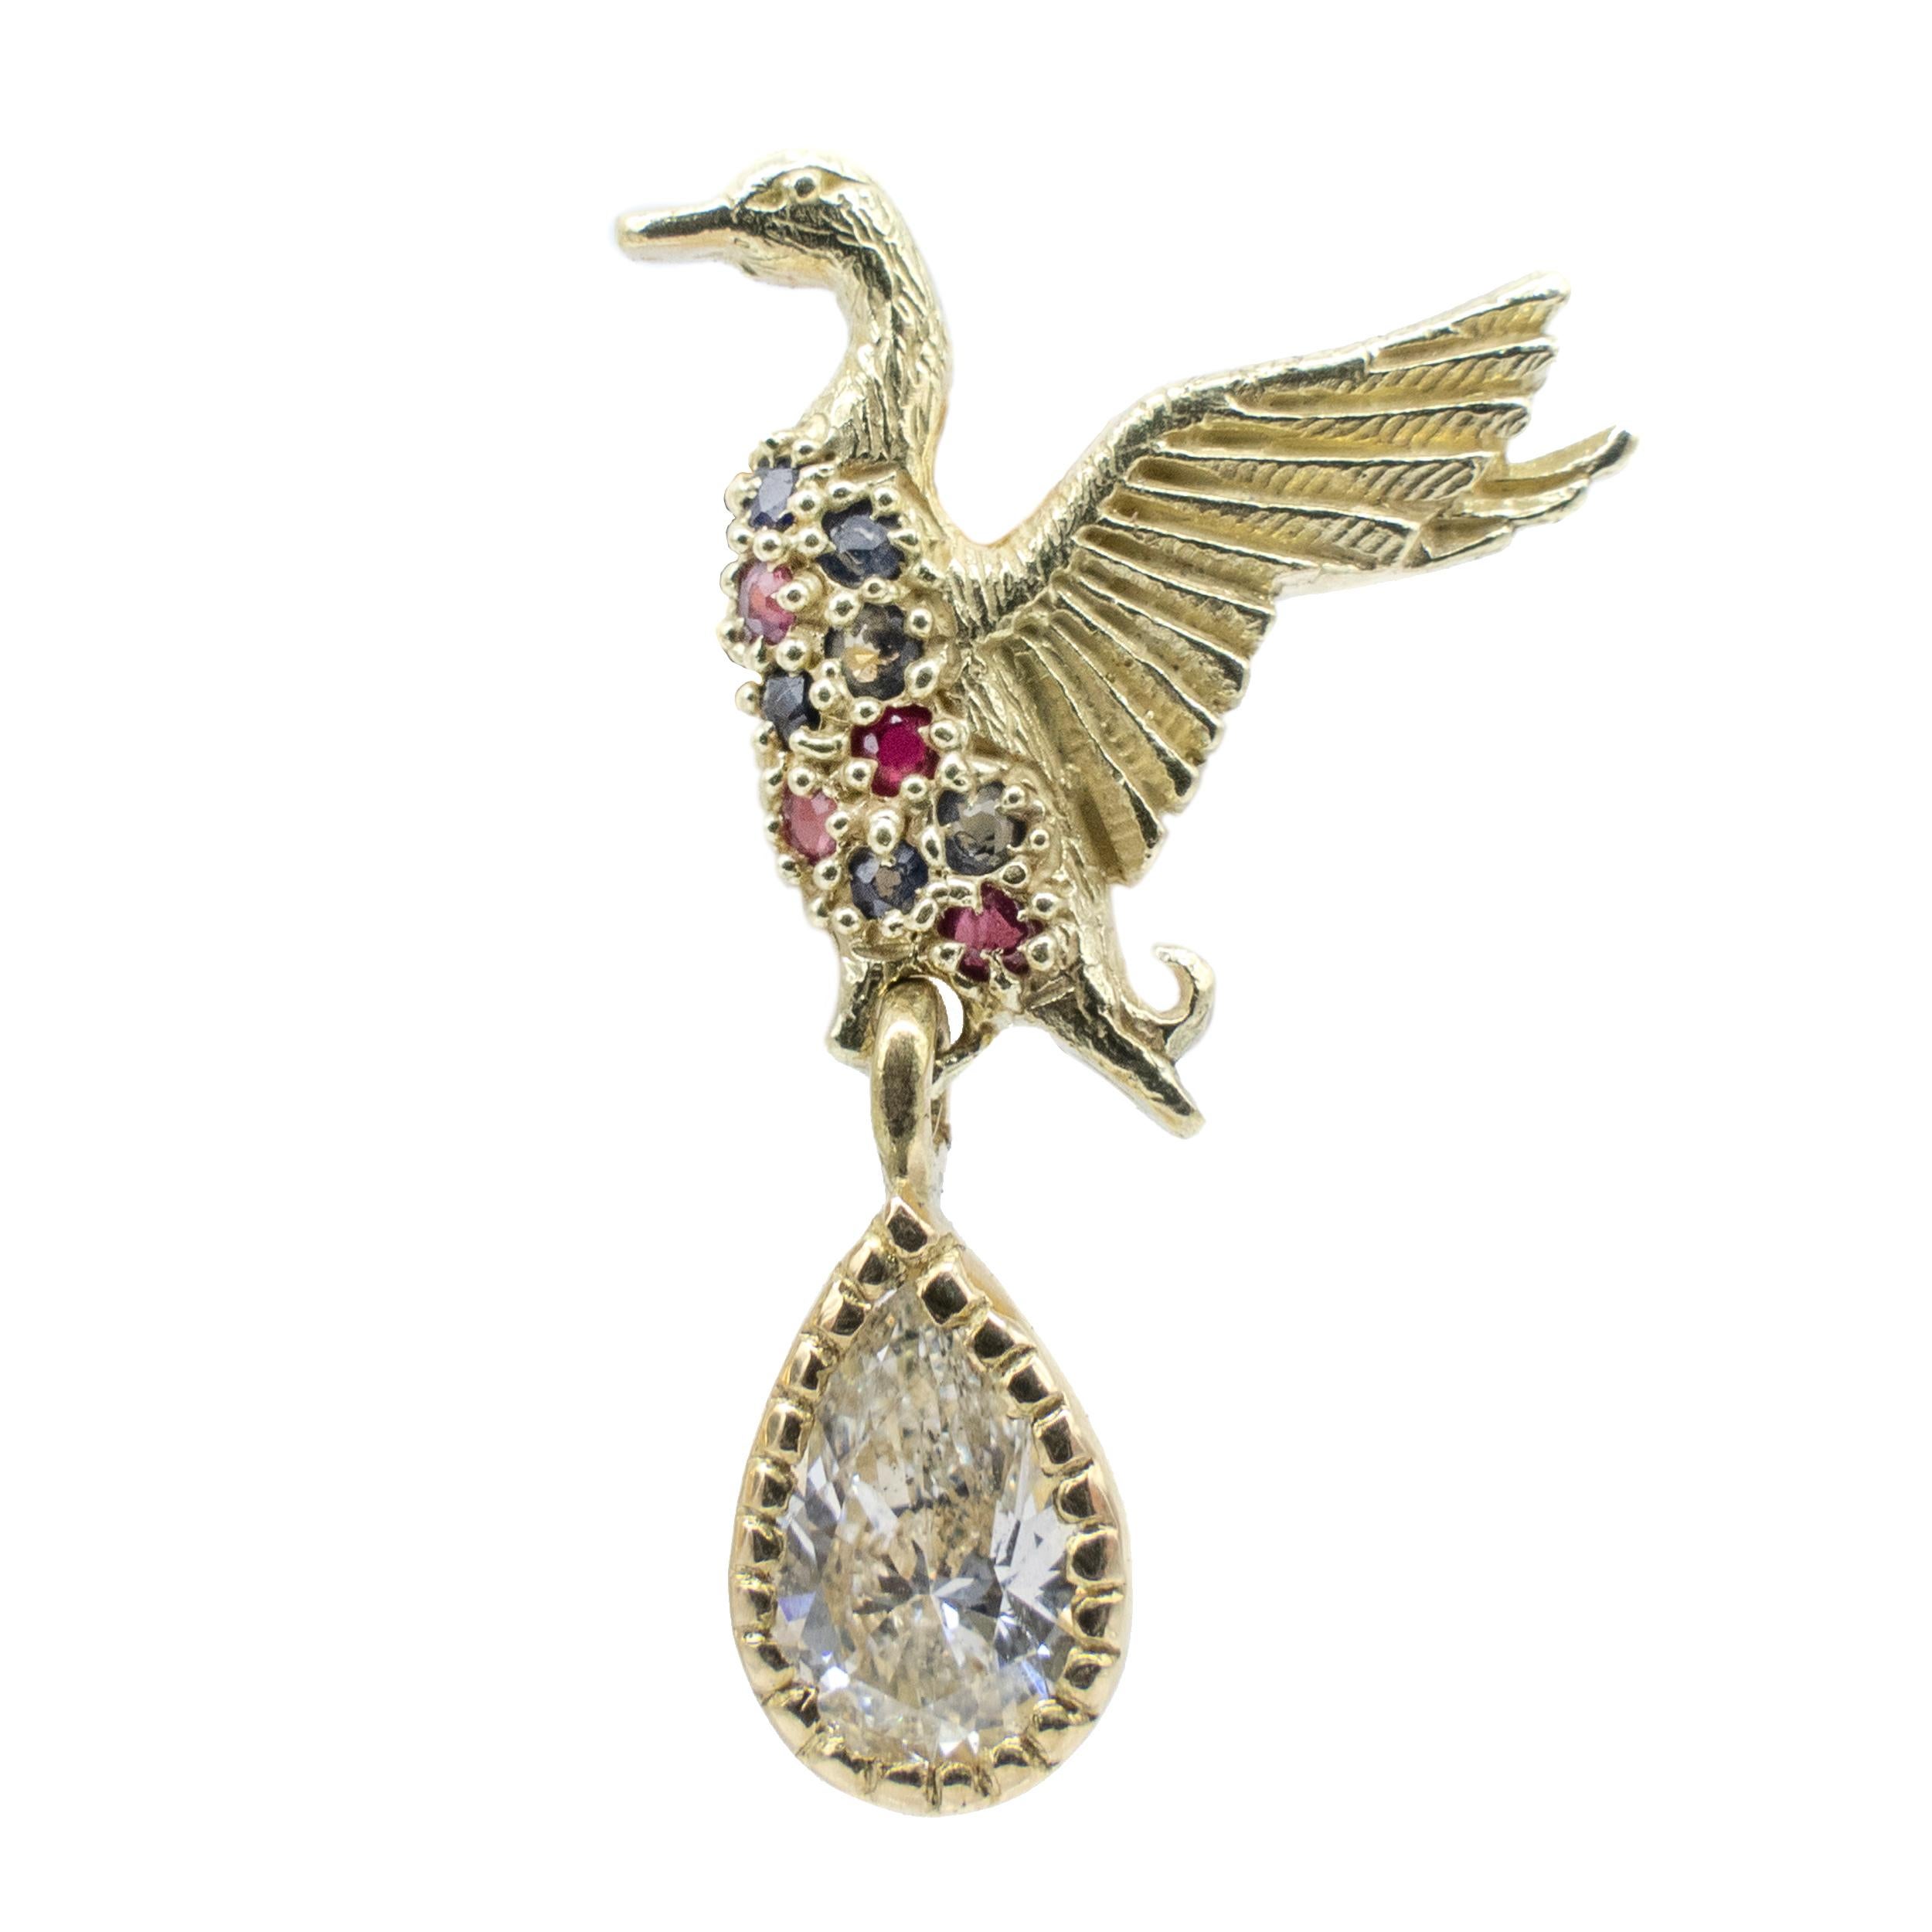 Earrings 18 Karat Gold Ducks Sapphires Rubies Pear Cut Diamond Vicente Gracia

Earrings of 18 karat yellow gold, sapphires, rubies, and two pear-cut diamonds of 0.51 cts H VVS2 and 0.50 cts I VVS2.

These exquisite 18 karat yellow gold earrings